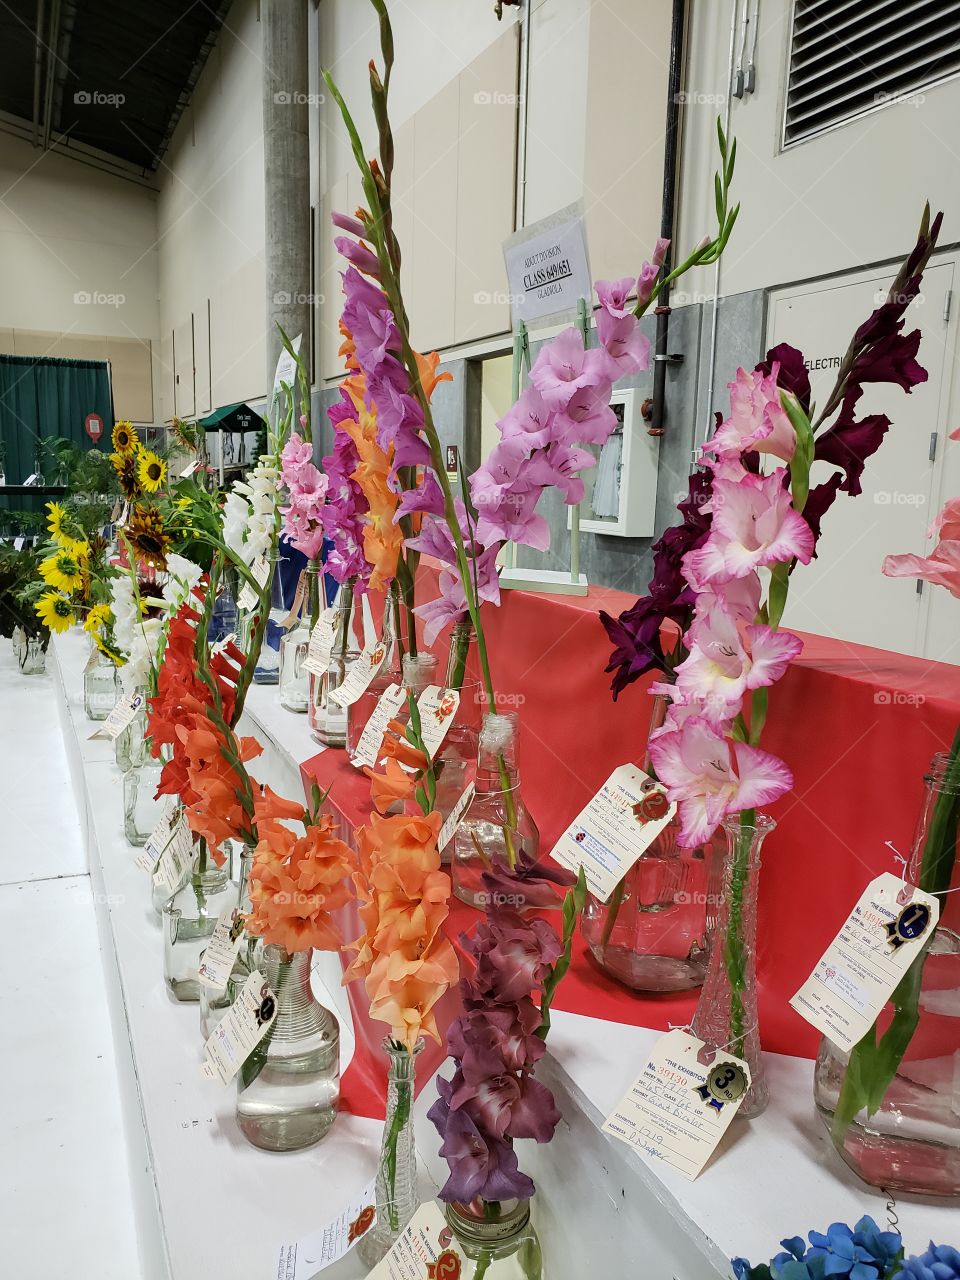 Judged flowers at the fair 3